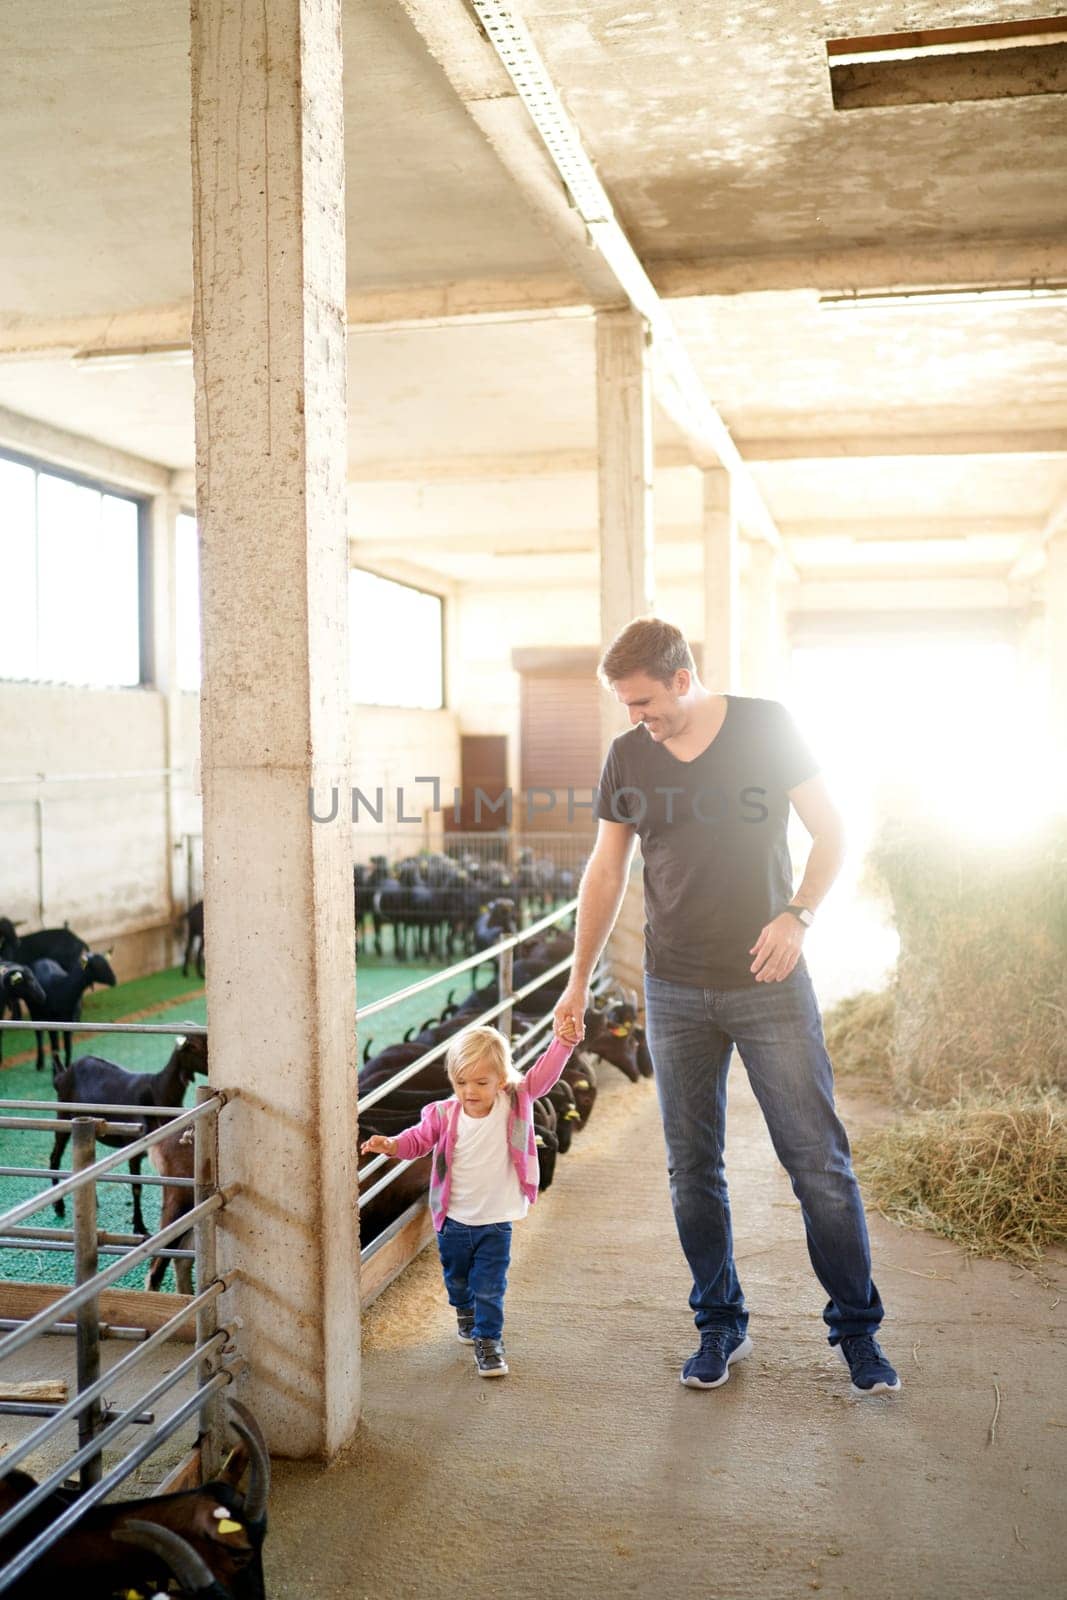 Dad and a little girl walk holding hands through a farm past eating goats by Nadtochiy